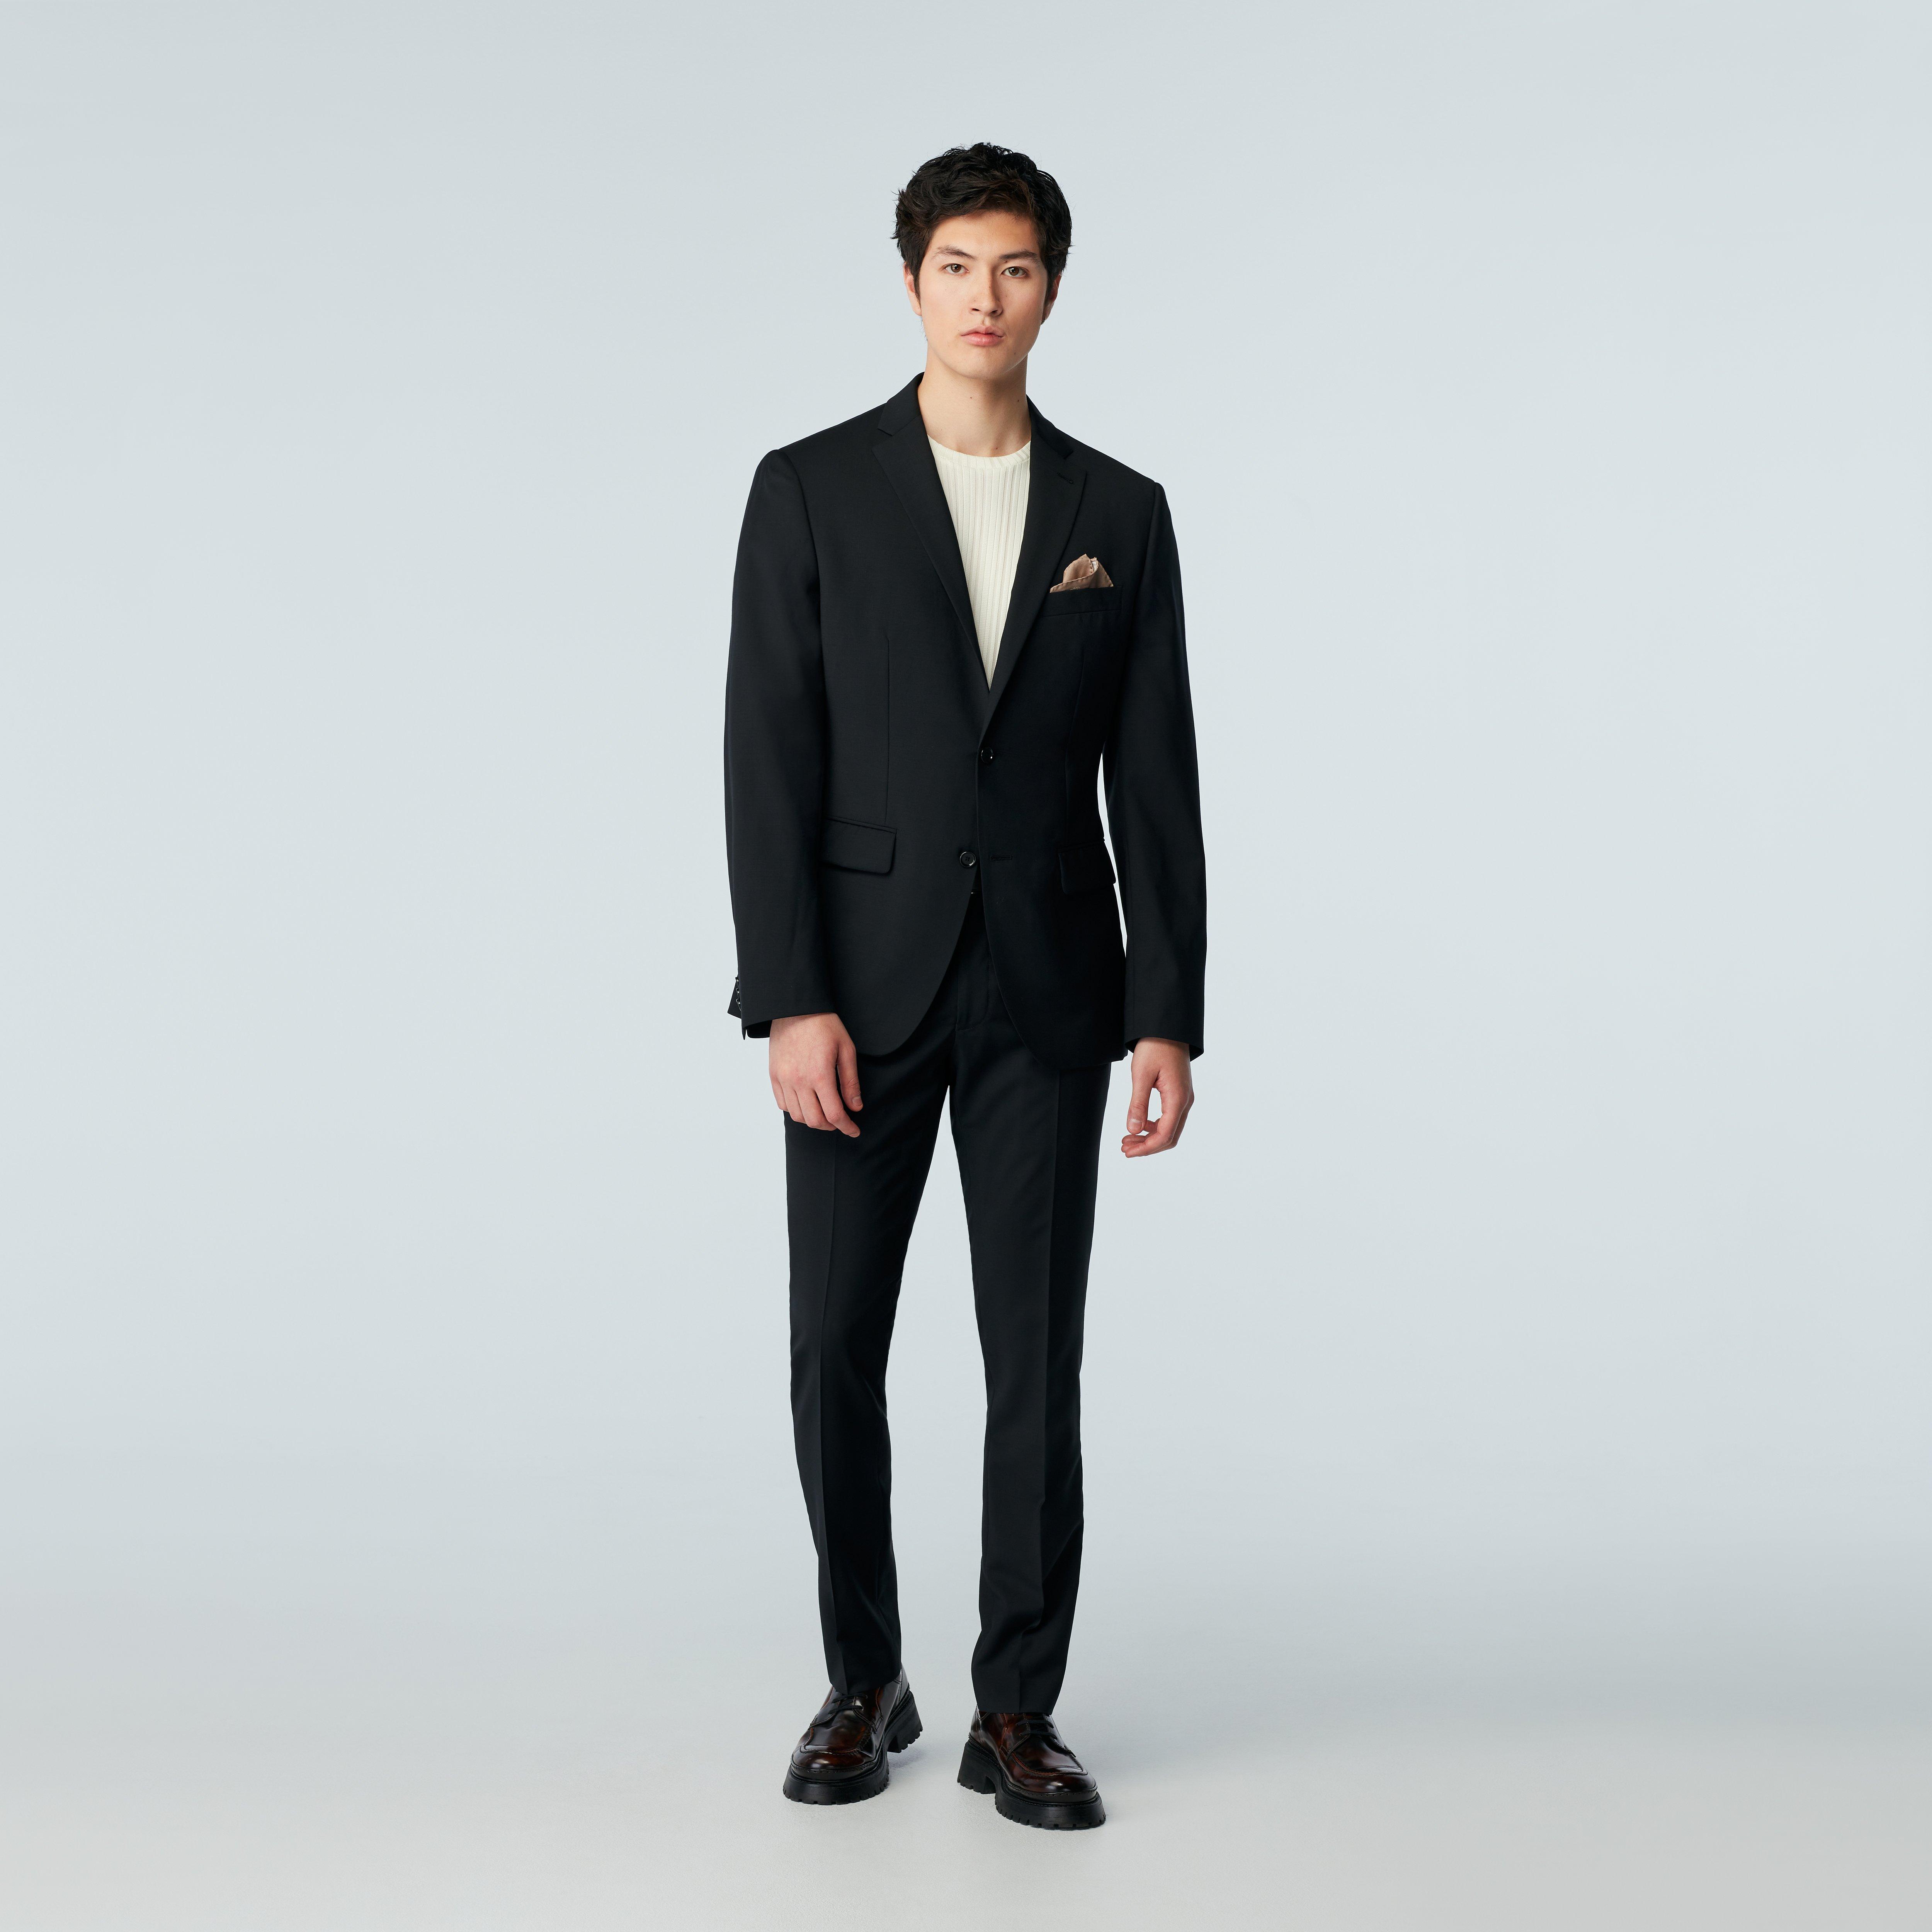 Custom Suits Made For You - Helsby Black Suit | INDOCHINO